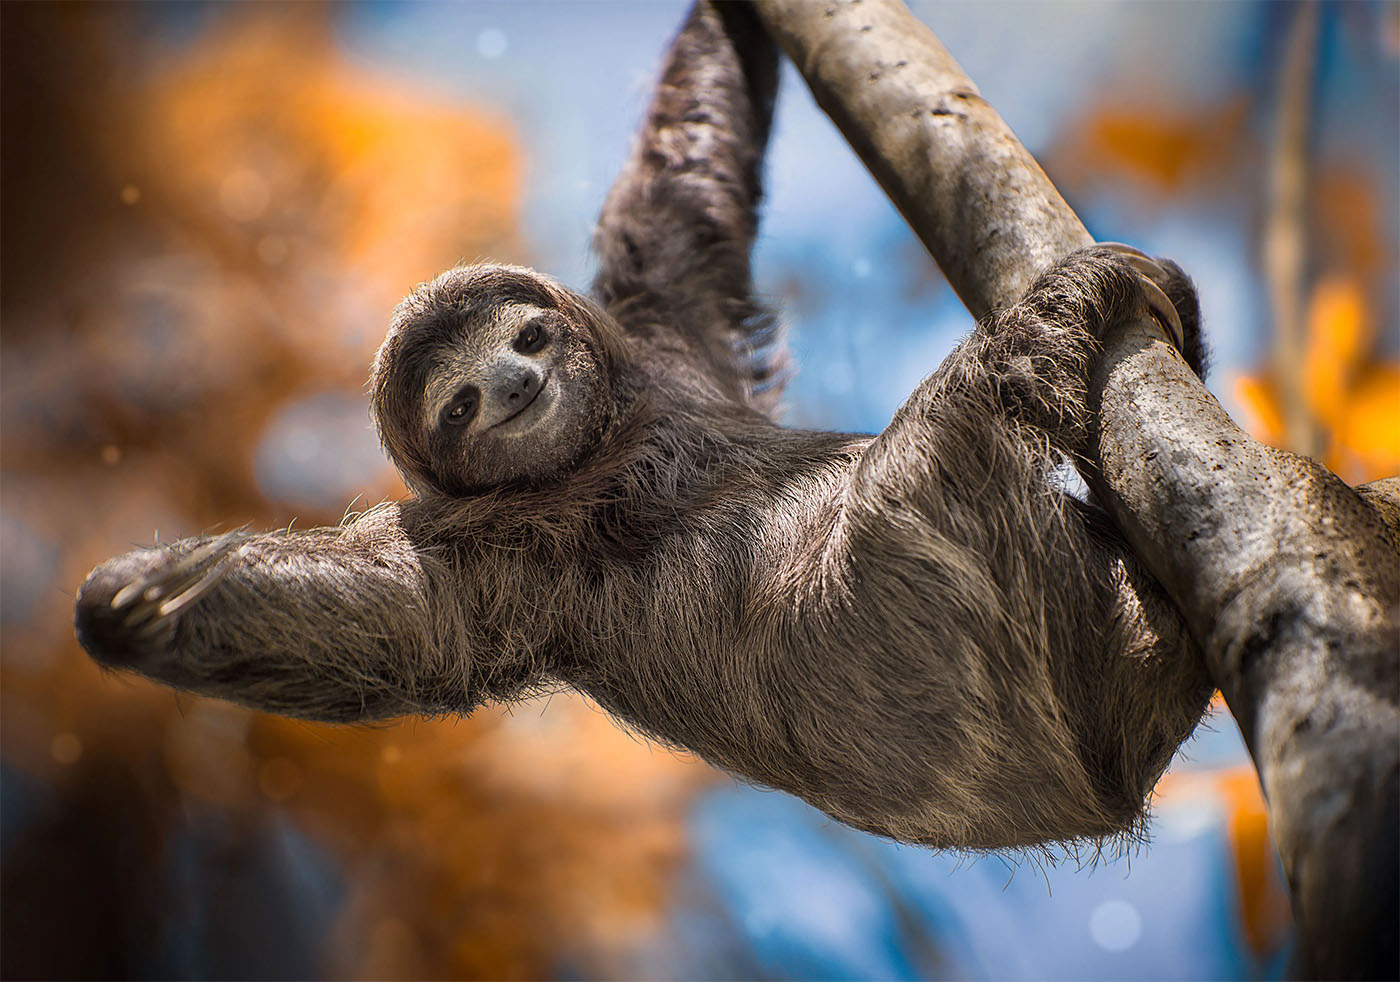 10 interesting facts about Sloths